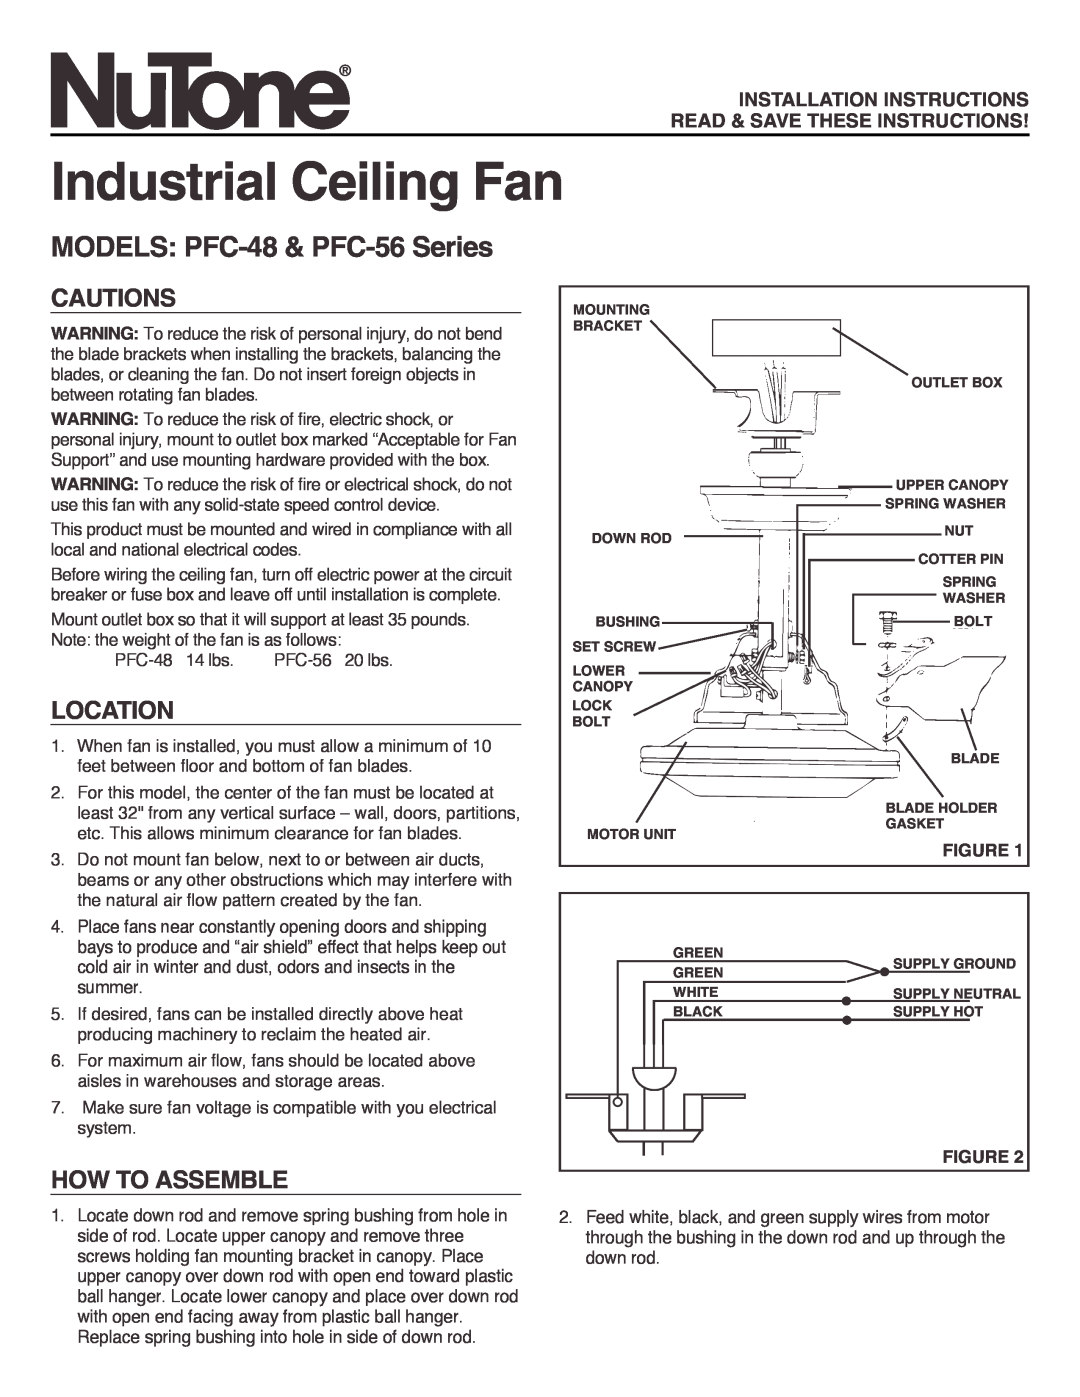 NuTone PFC-56, PFC-48 installation instructions Cautions, Location, How To Assemble, Industrial Ceiling Fan 